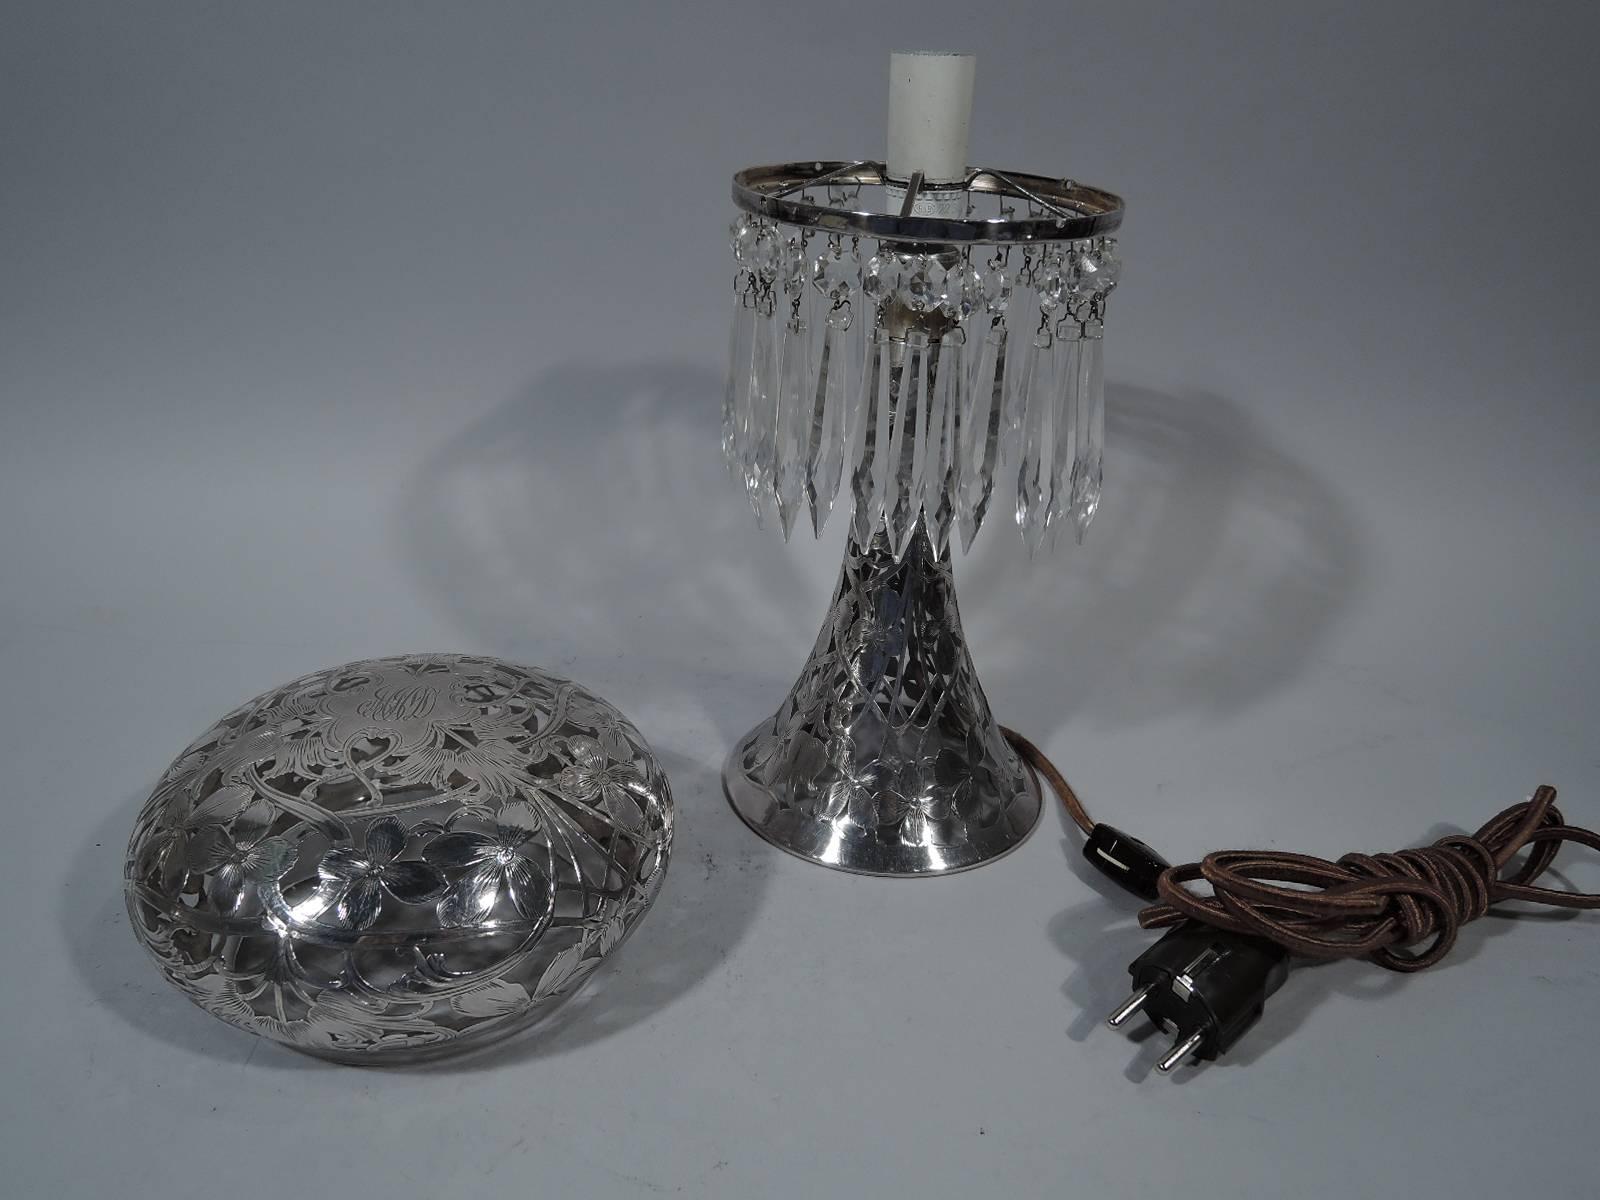 One of a Kind American glass table lamp with silver overlay, circa 1900. Conical base and bun shade in clear glass with floral silver overlay. Crystal lusters (the dangly bits) loose-mounted from shade frame. Interlaced script monogram engraved on